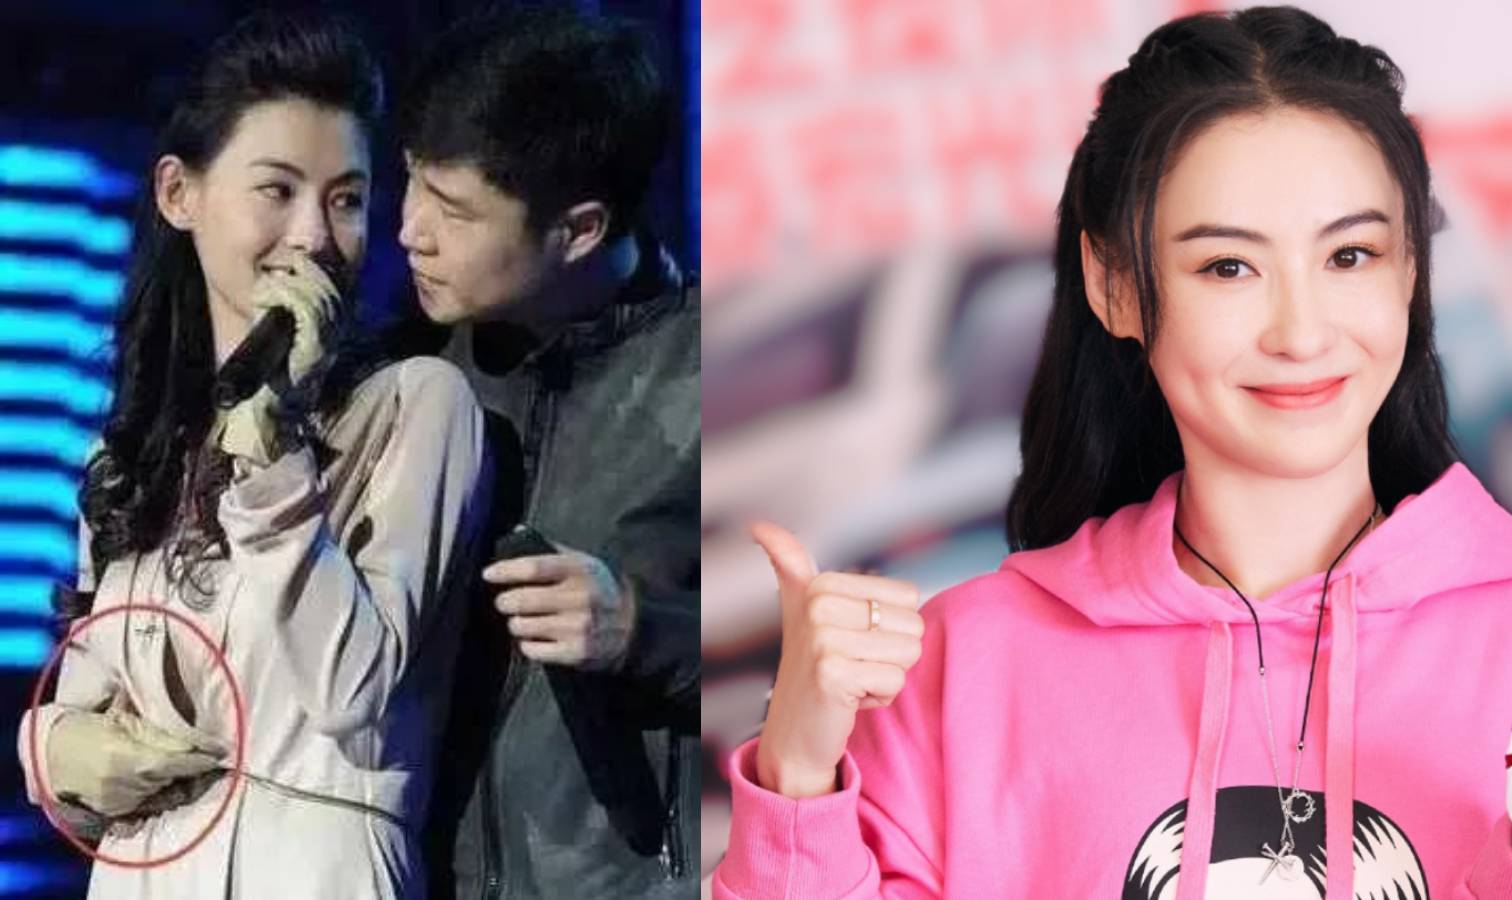 Chinese Actor Xiao Shenyang Was Once Accused Of Groping Cecilia Cheung During A Performance, So Why Did She Thank Him For photo